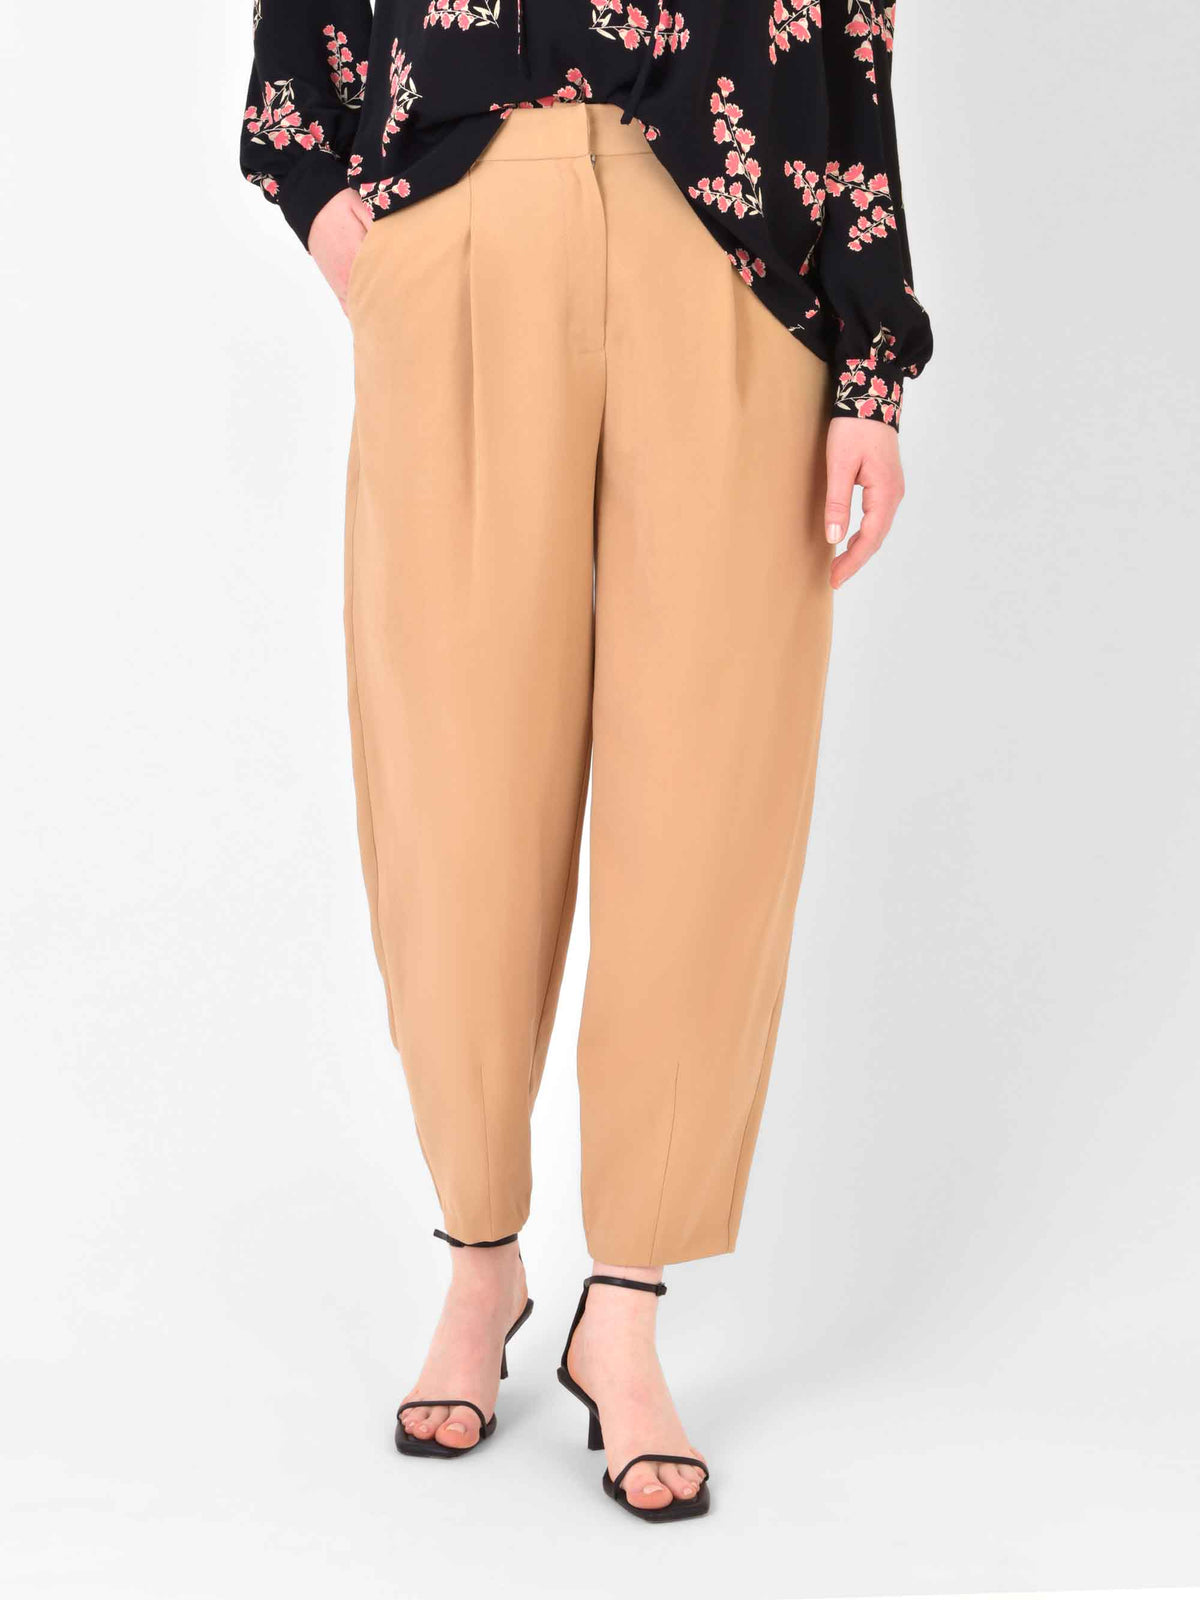 Tailored Pleat Detail Trouser